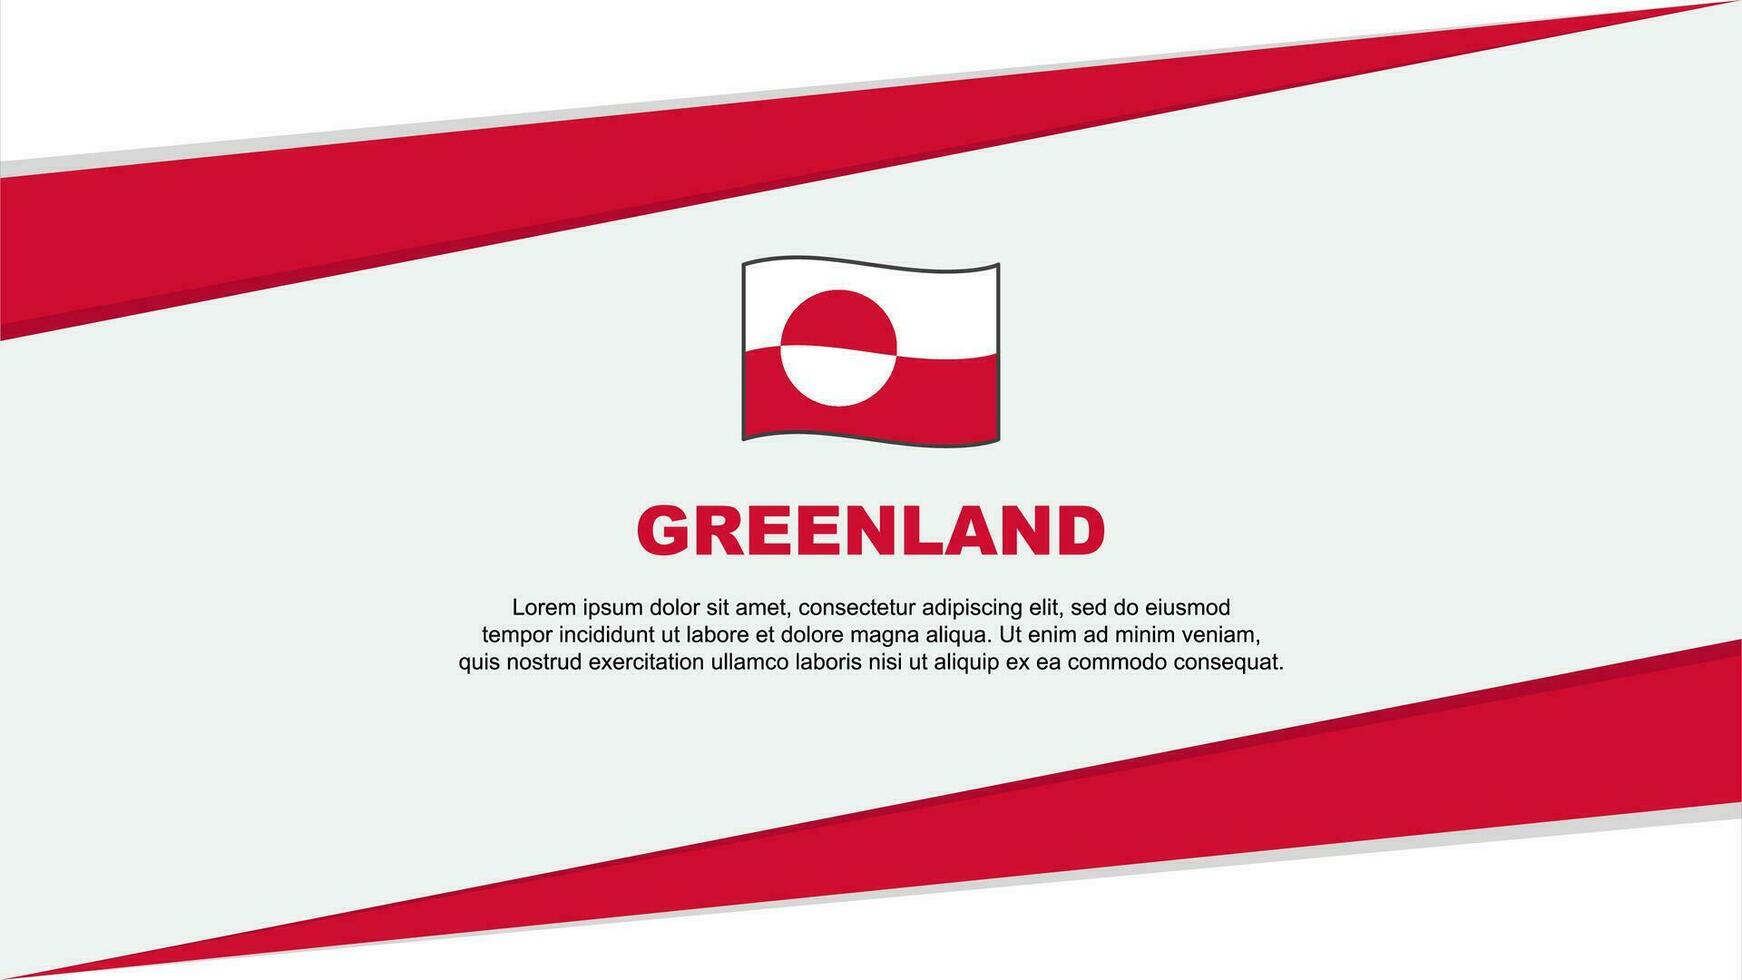 Greenland Flag Abstract Background Design Template. Greenland Independence Day Banner Cartoon Vector Illustration. Greenland Design